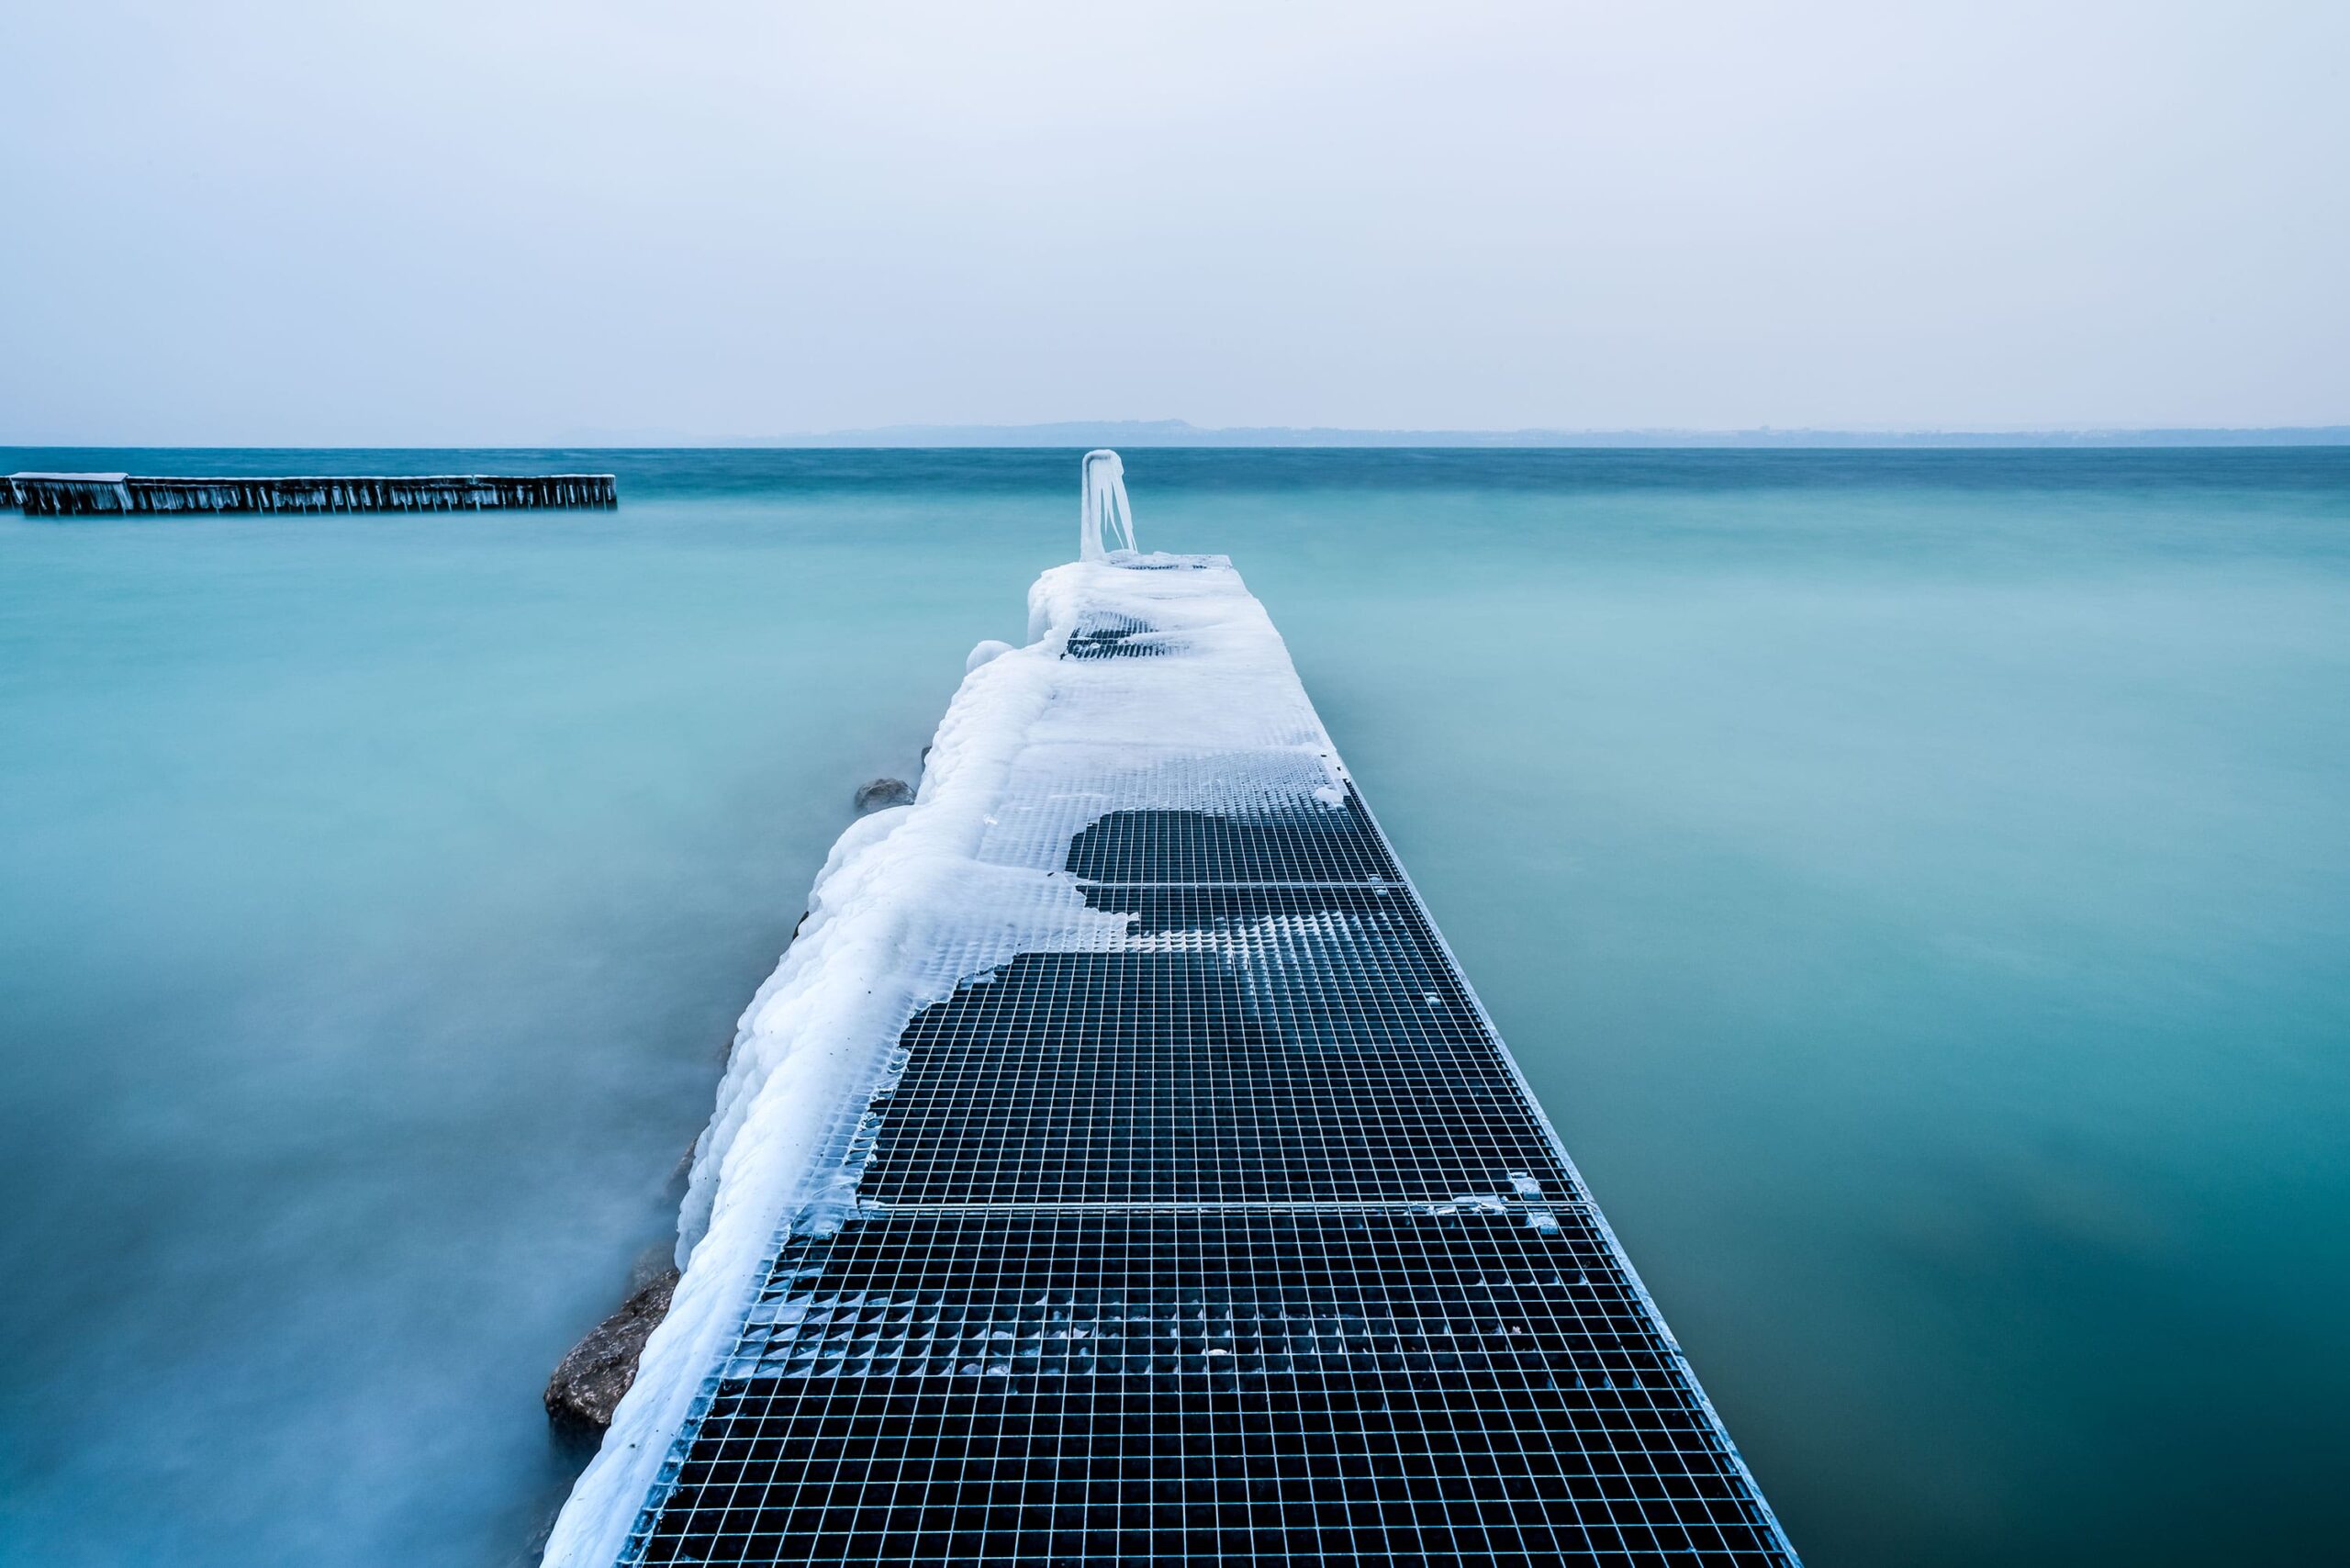 Explore the enchanting sight of an icy pier nestled in the picturesque village of Boudry, located in the scenic canton of Neuchâtel. Captured through the lens of landscape photographer [Your Name], this captivating image showcases the serene beauty of the winter landscape. Immerse yourself in the tranquility of this snowy scene and discover the wonders of Switzerland's natural charm through [Your Name]'s portfolio of stunning landscape photography.